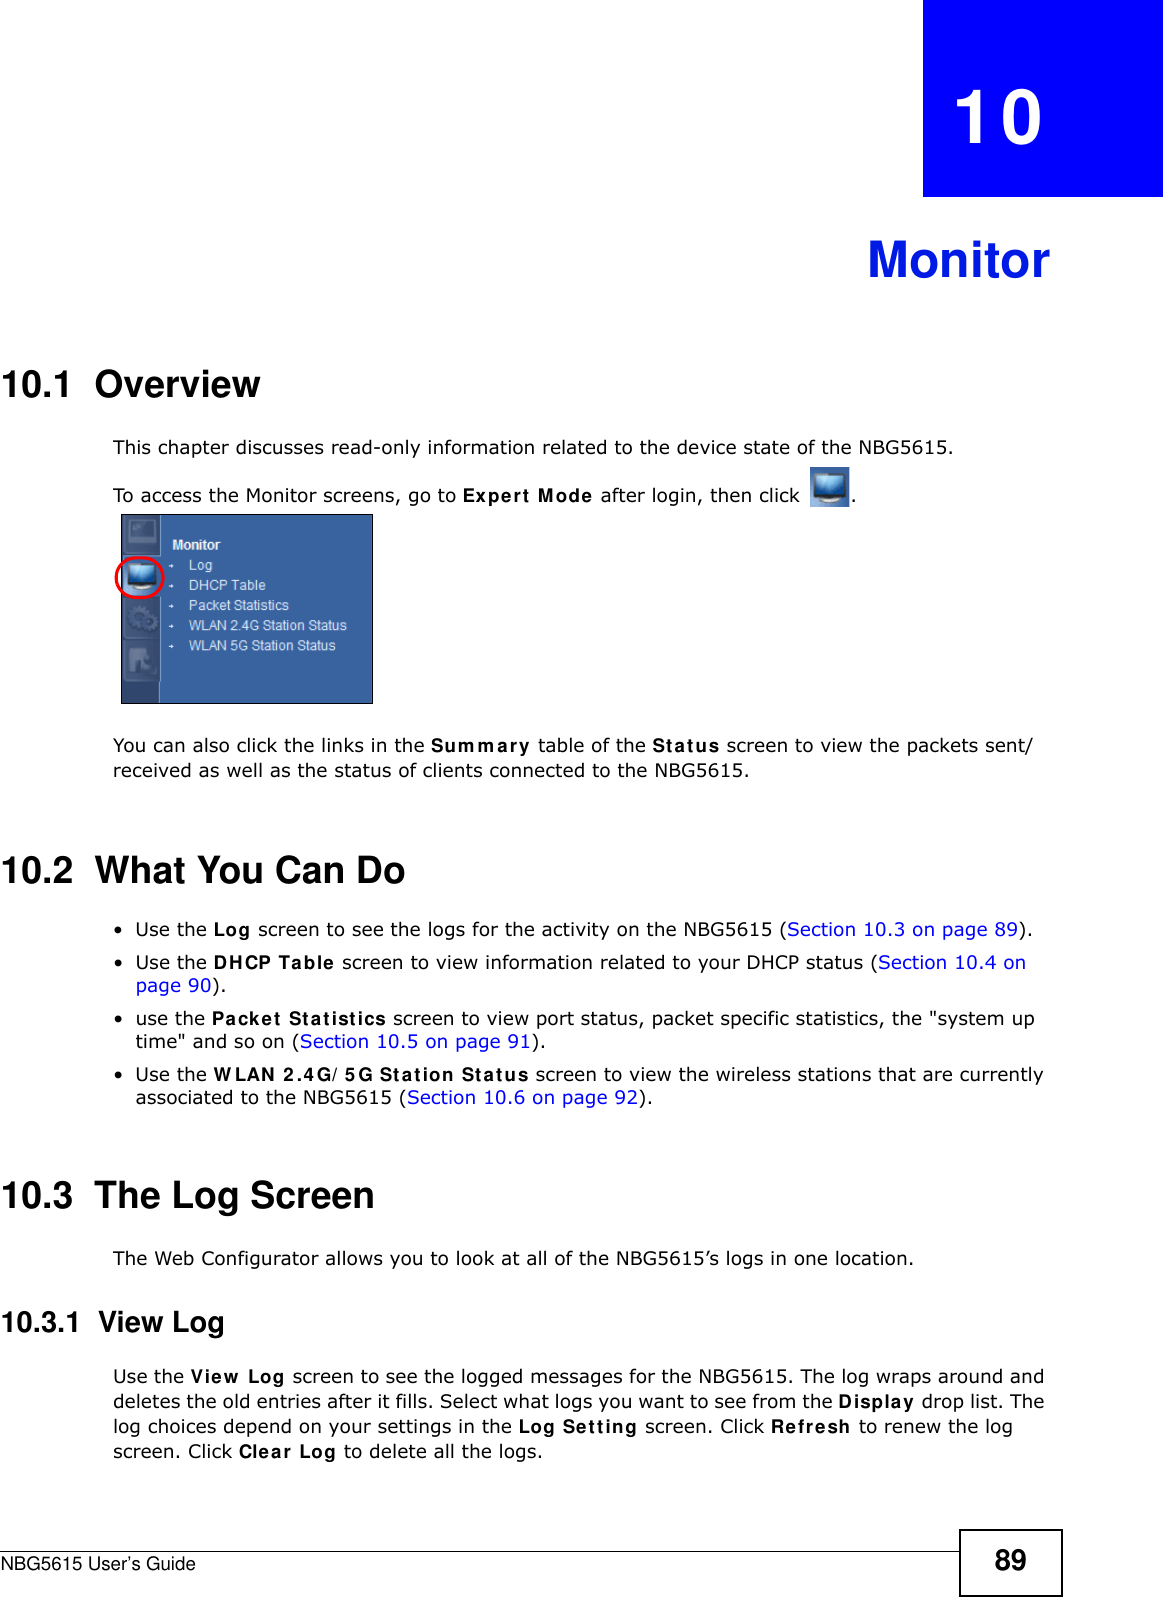 NBG5615 User’s Guide 89CHAPTER   10Monitor10.1  OverviewThis chapter discusses read-only information related to the device state of the NBG5615. To access the Monitor screens, go to Expert Mode after login, then click  .  You can also click the links in the Sum m ary table of the Status screen to view the packets sent/received as well as the status of clients connected to the NBG5615.10.2  What You Can Do•Use the Log screen to see the logs for the activity on the NBG5615 (Section 10.3 on page 89).•Use the DHCP Table screen to view information related to your DHCP status (Section 10.4 on page 90).•use the Packet Statistics screen to view port status, packet specific statistics, the &quot;system up time&quot; and so on (Section 10.5 on page 91).•Use the W LAN 2 .4G/ 5G Station Status screen to view the wireless stations that are currently associated to the NBG5615 (Section 10.6 on page 92).10.3  The Log ScreenThe Web Configurator allows you to look at all of the NBG5615’s logs in one location.10.3.1  View LogUse the View  Log screen to see the logged messages for the NBG5615. The log wraps around and deletes the old entries after it fills. Select what logs you want to see from the Display drop list. The log choices depend on your settings in the Log Setting screen. Click Refresh to renew the log screen. Click Clear Log to delete all the logs.